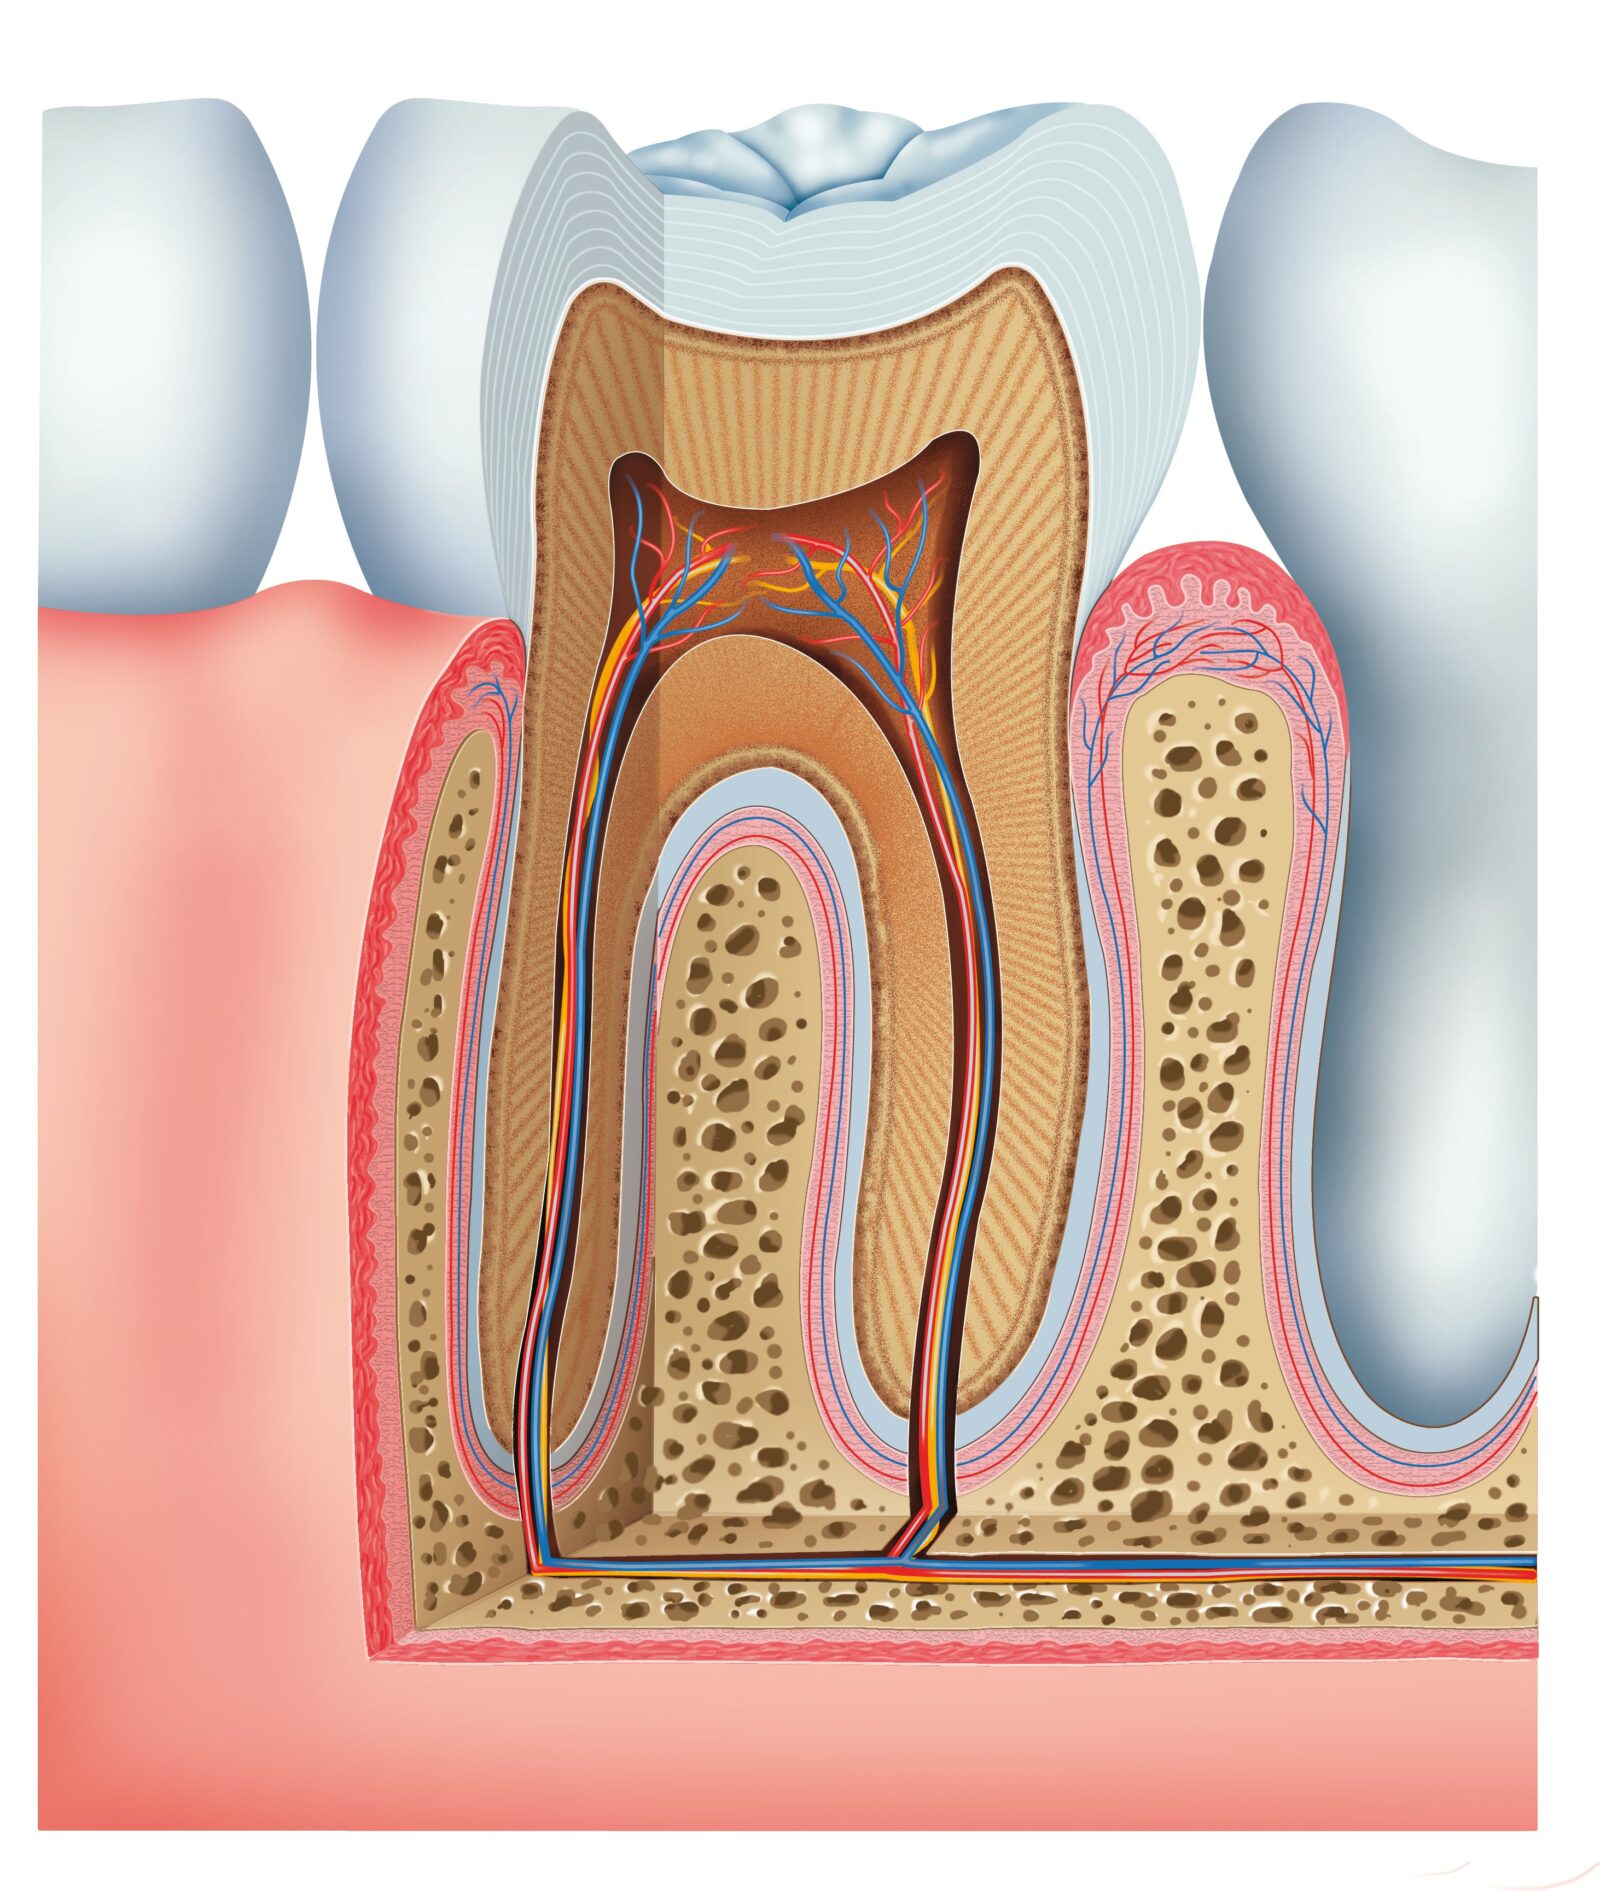 layers of the tooth